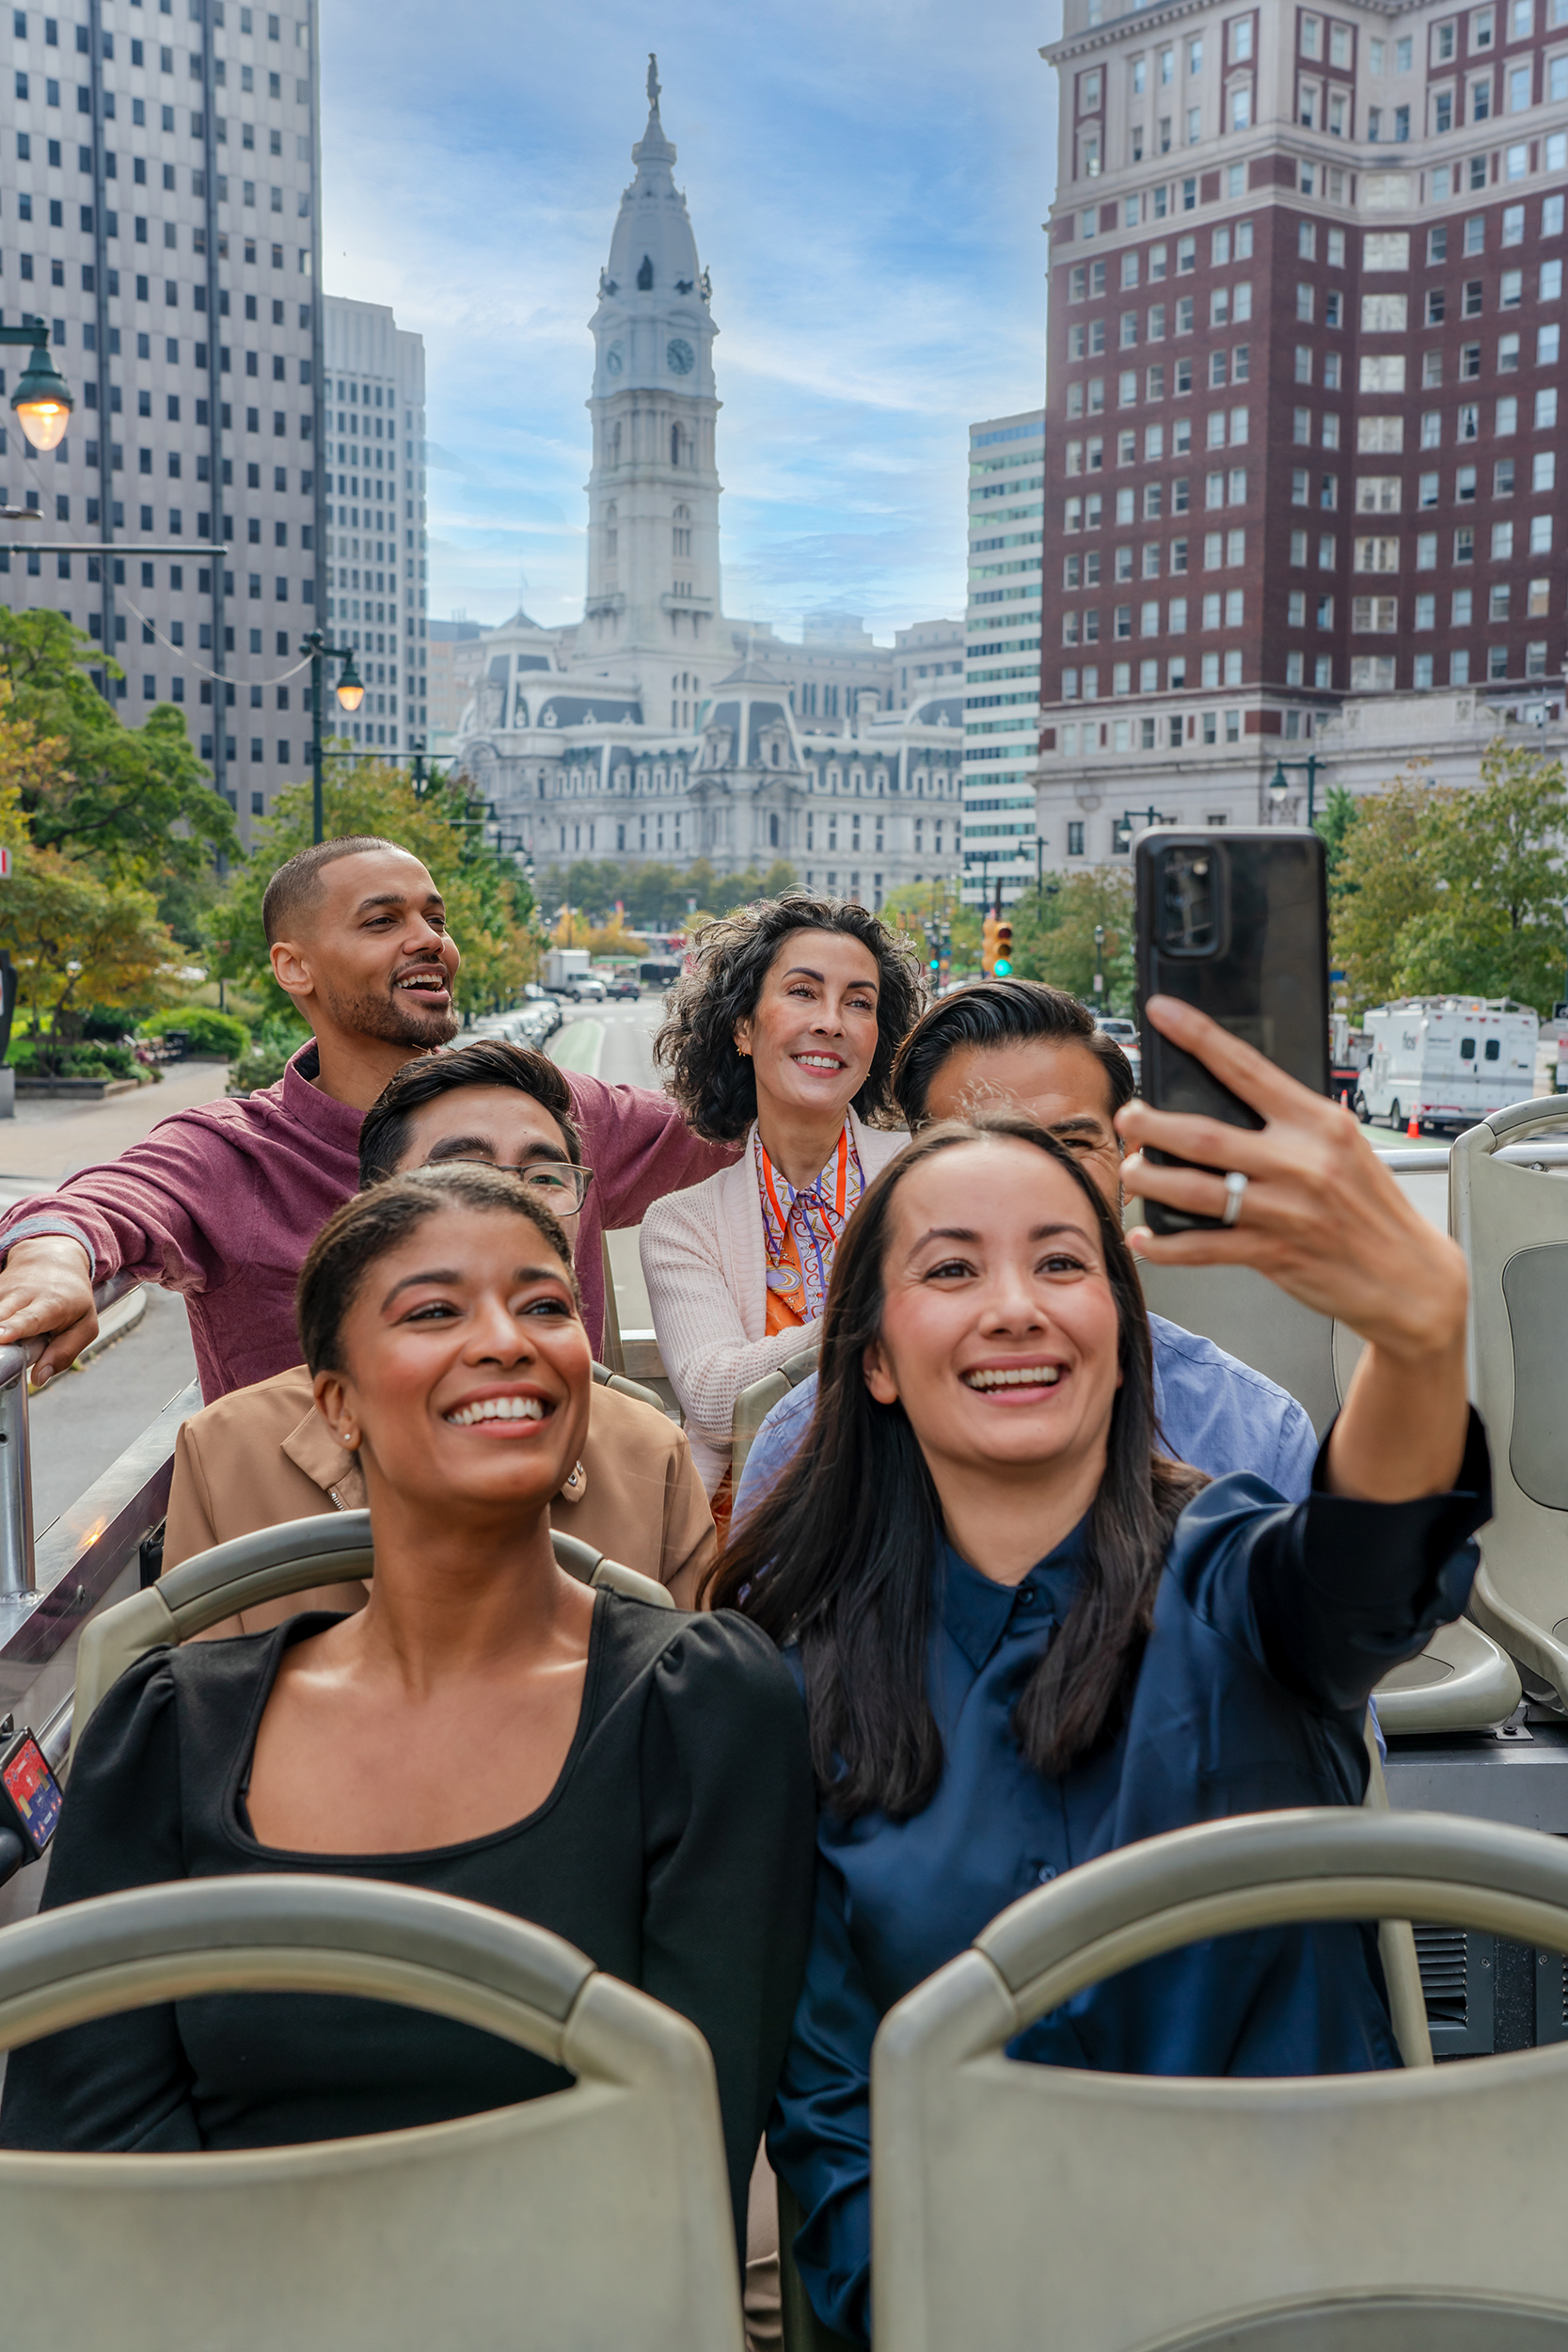 A group of people on a tour bus take a selfie with Philadelphia's City Hall in the background.